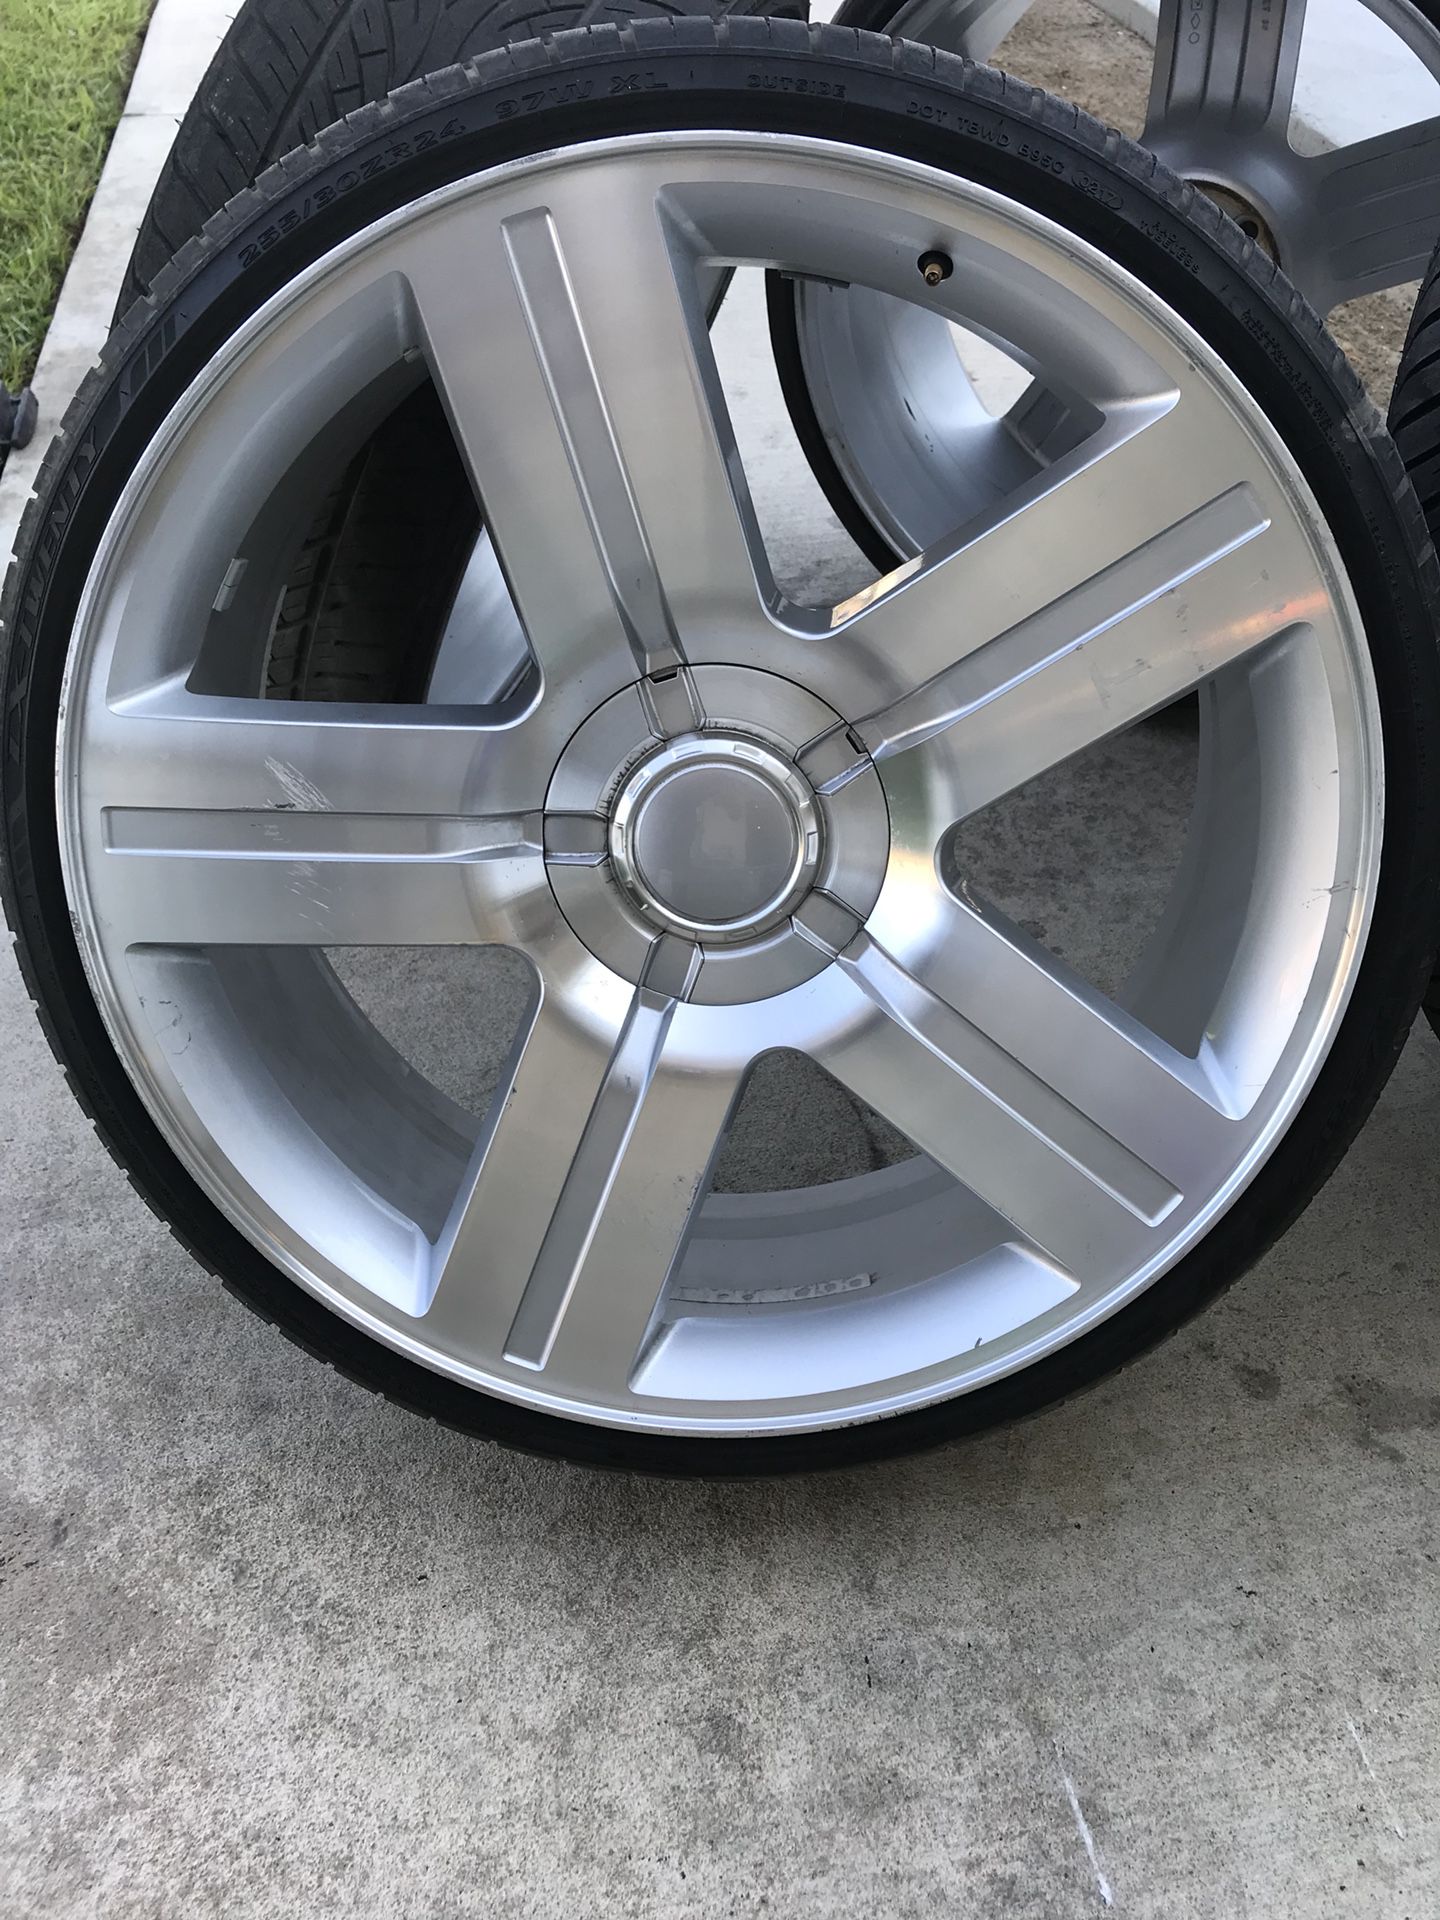 24s replica on 33s for Sale in Duncanville, TX - OfferUp